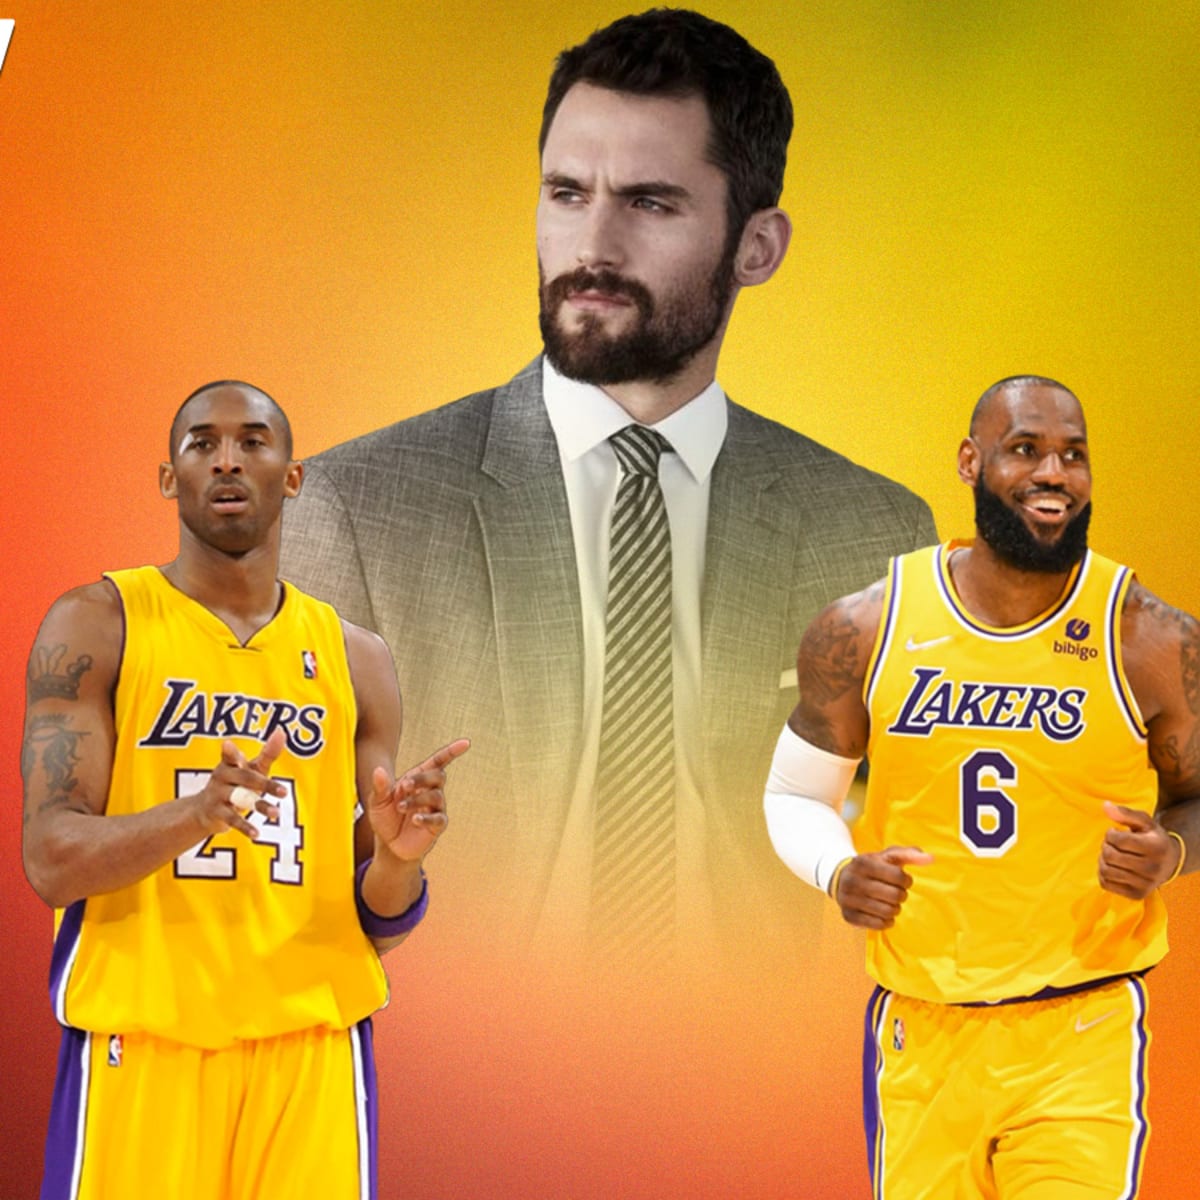 Kevin Love Said Kobe Bryant, Not LeBron James, Brought The Most 'Buzz' To  NBA Games: 